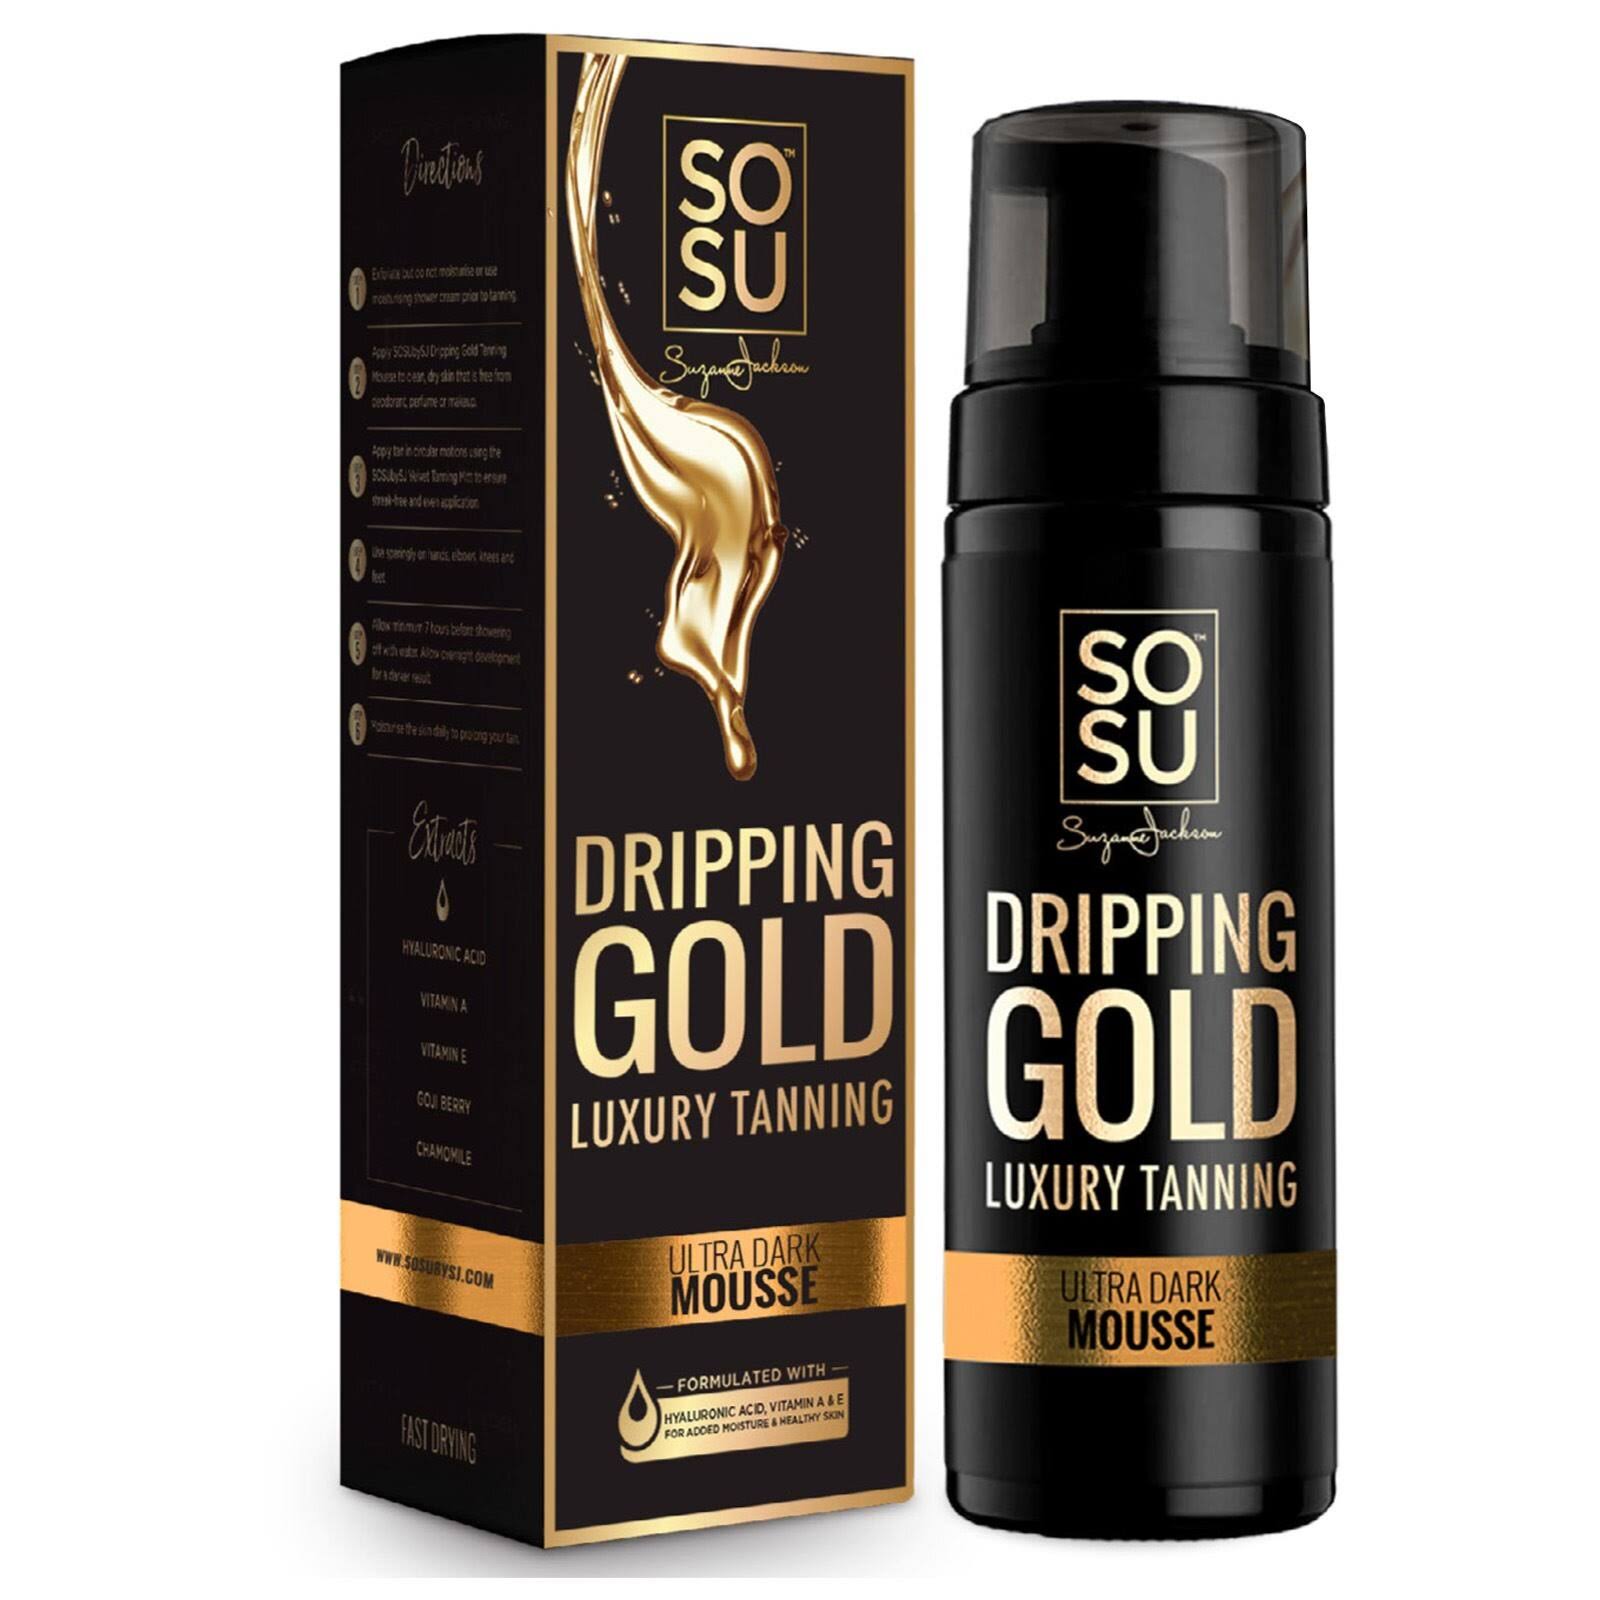 SOSU by Suzanne Jackson Dripping Gold Luxury Tanning Mousse Ultra Dark